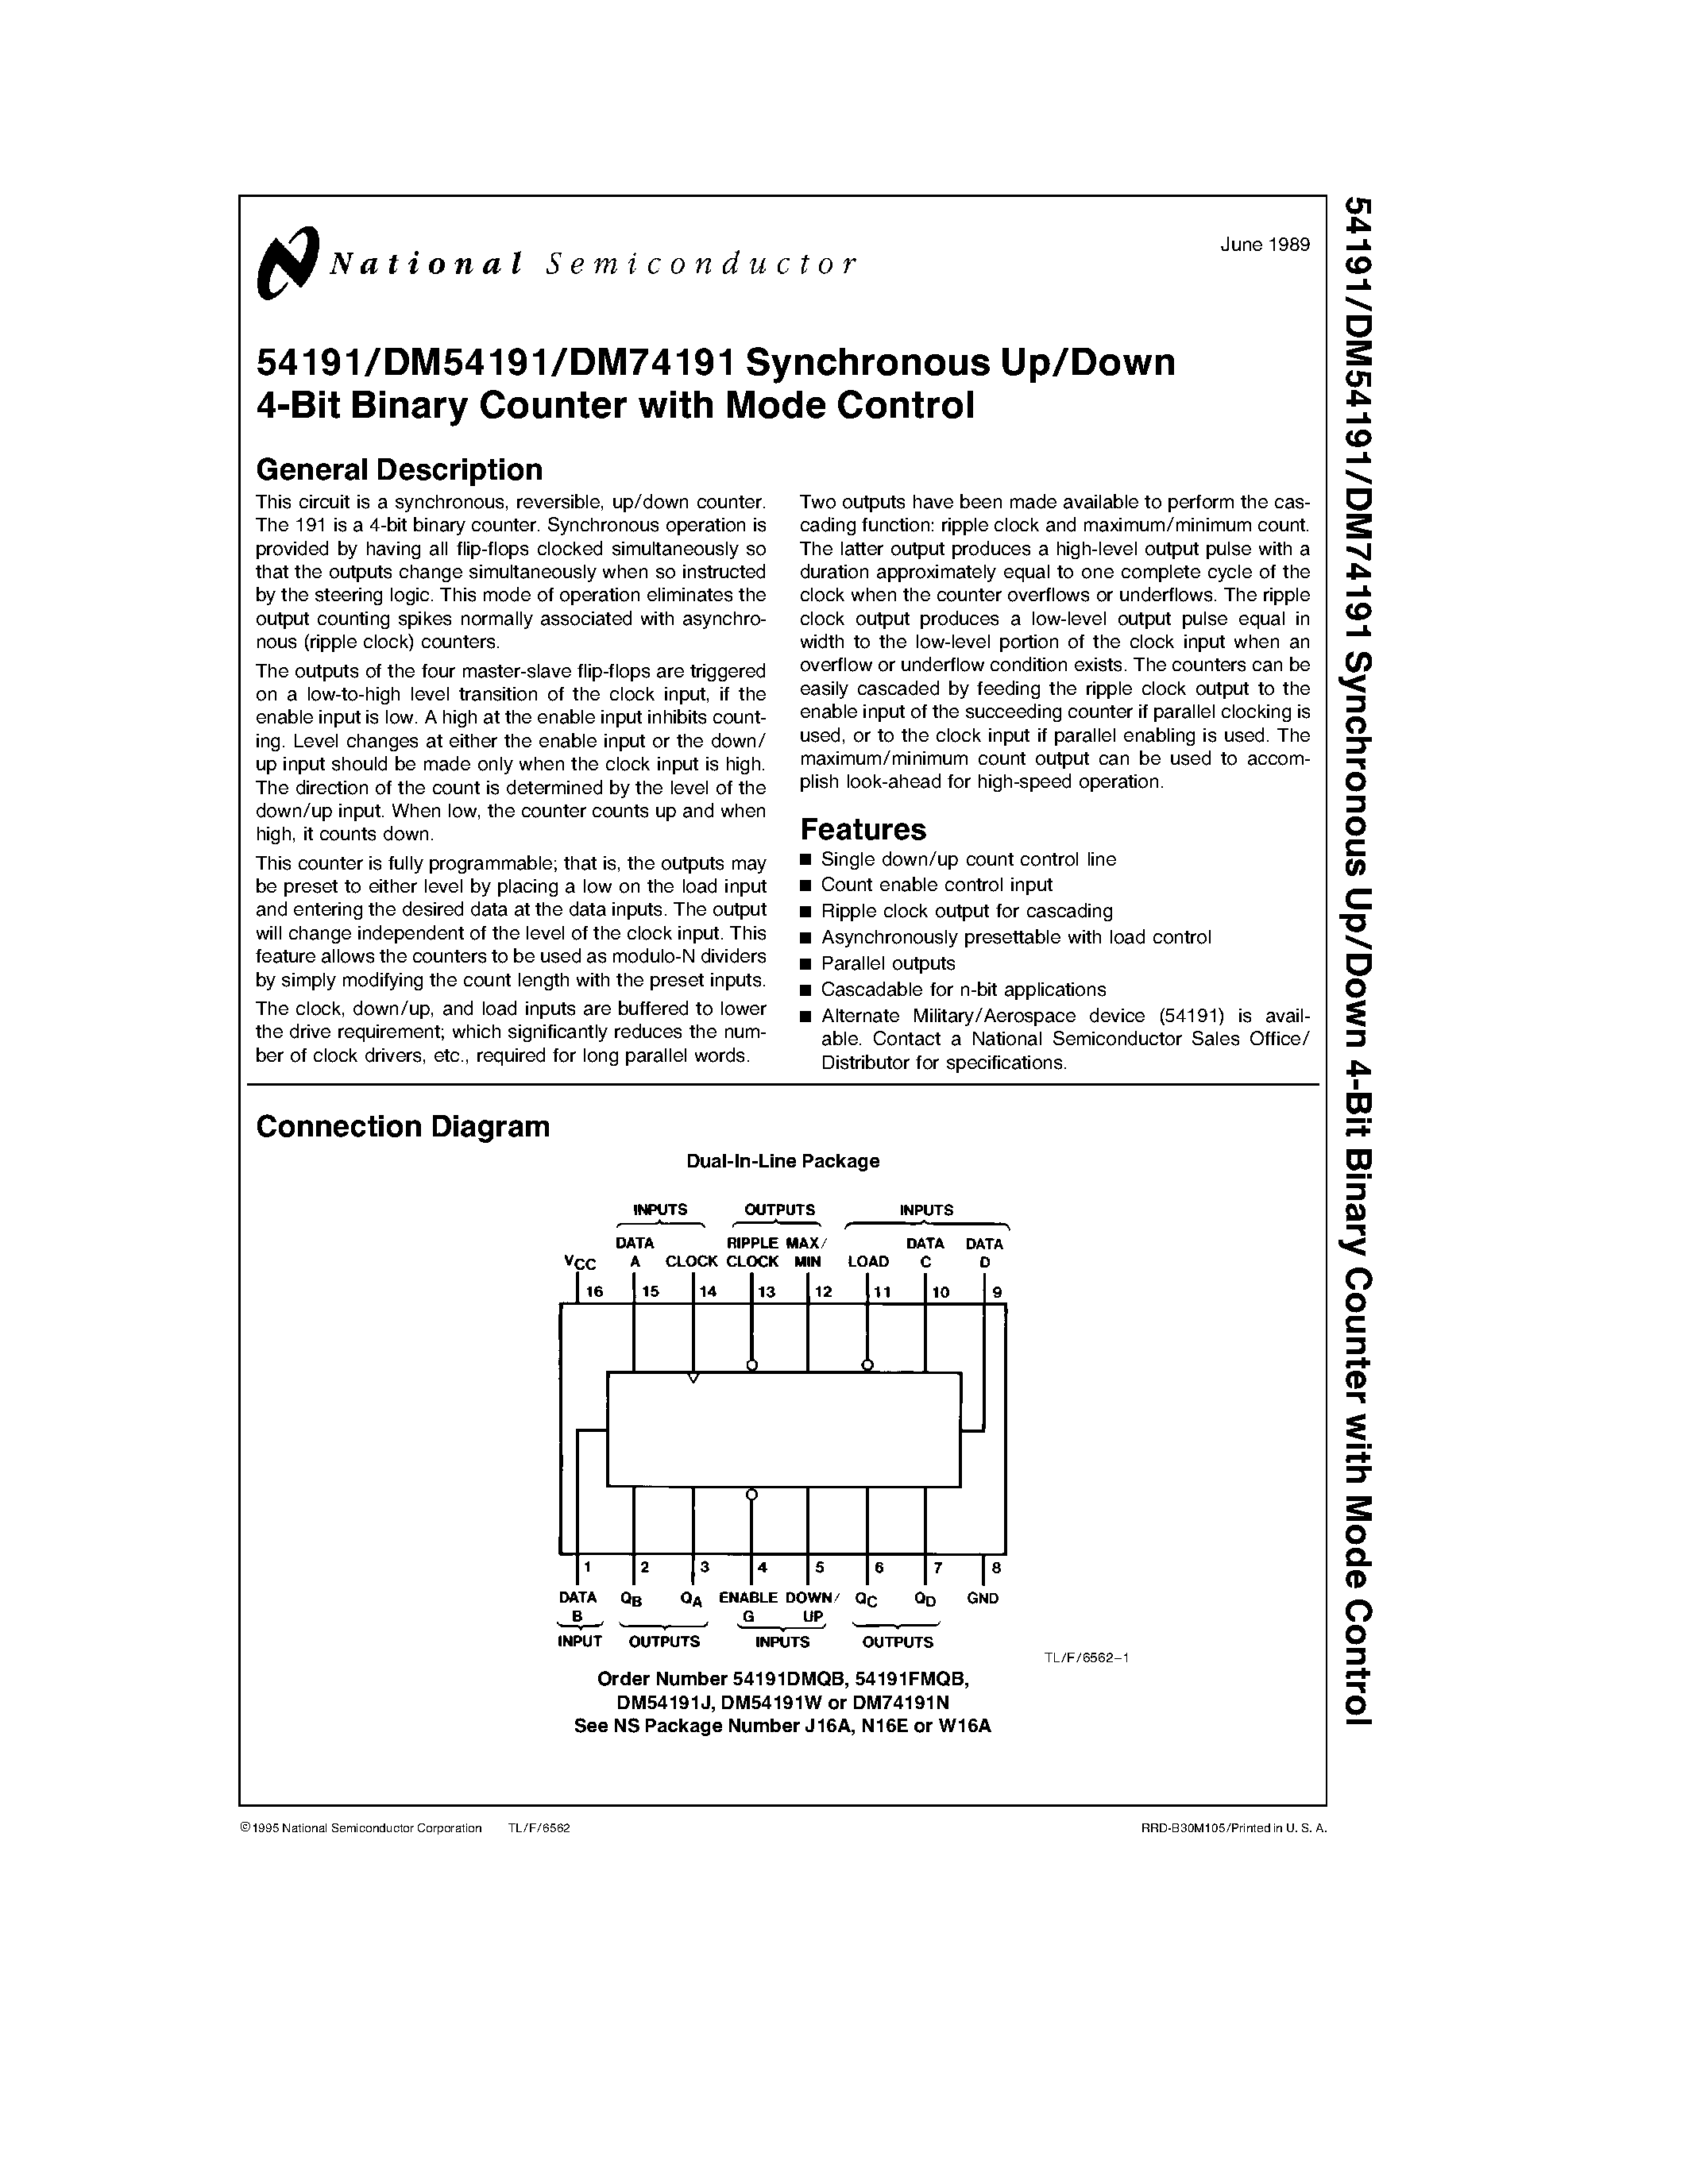 Datasheet 54191FMQB - Synchronous Up/Down 4-Bit Binary Counter with Mode Control page 1